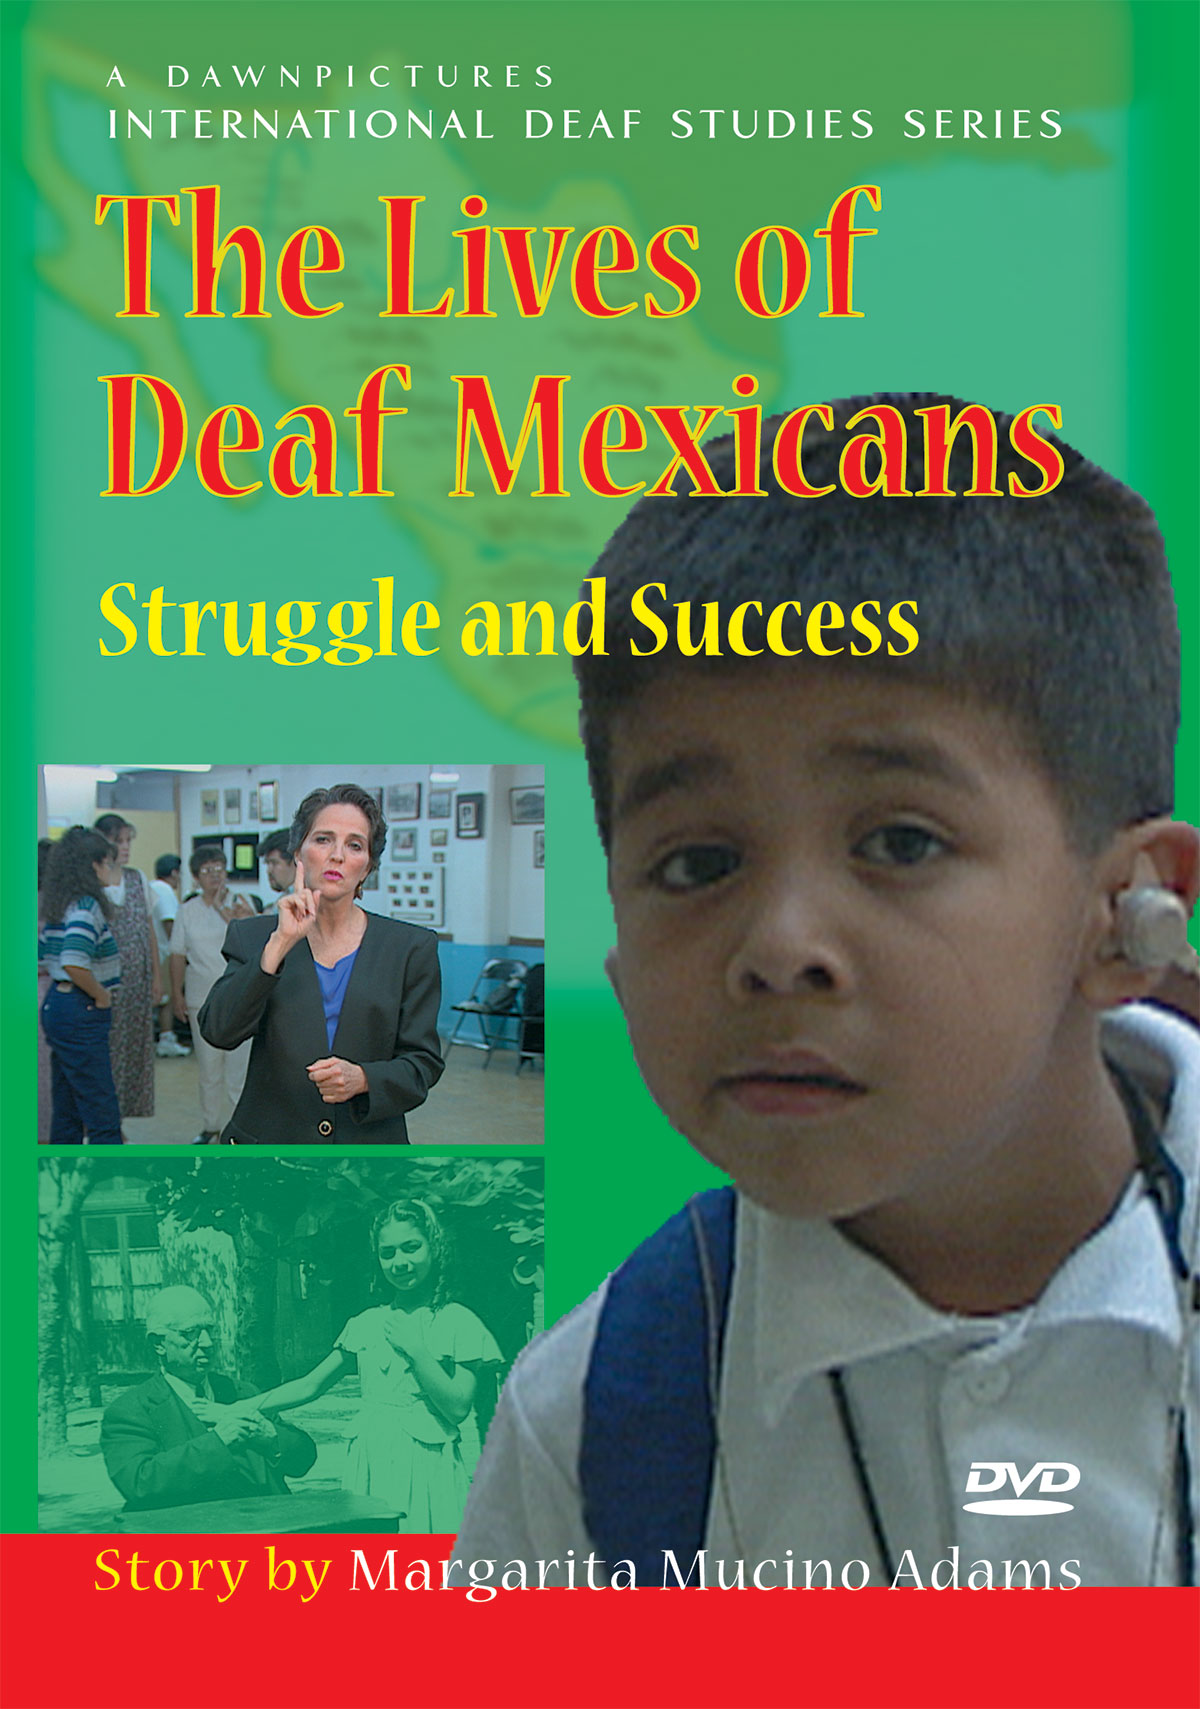 The Lives of Deaf Mexicans: Struggle and Success